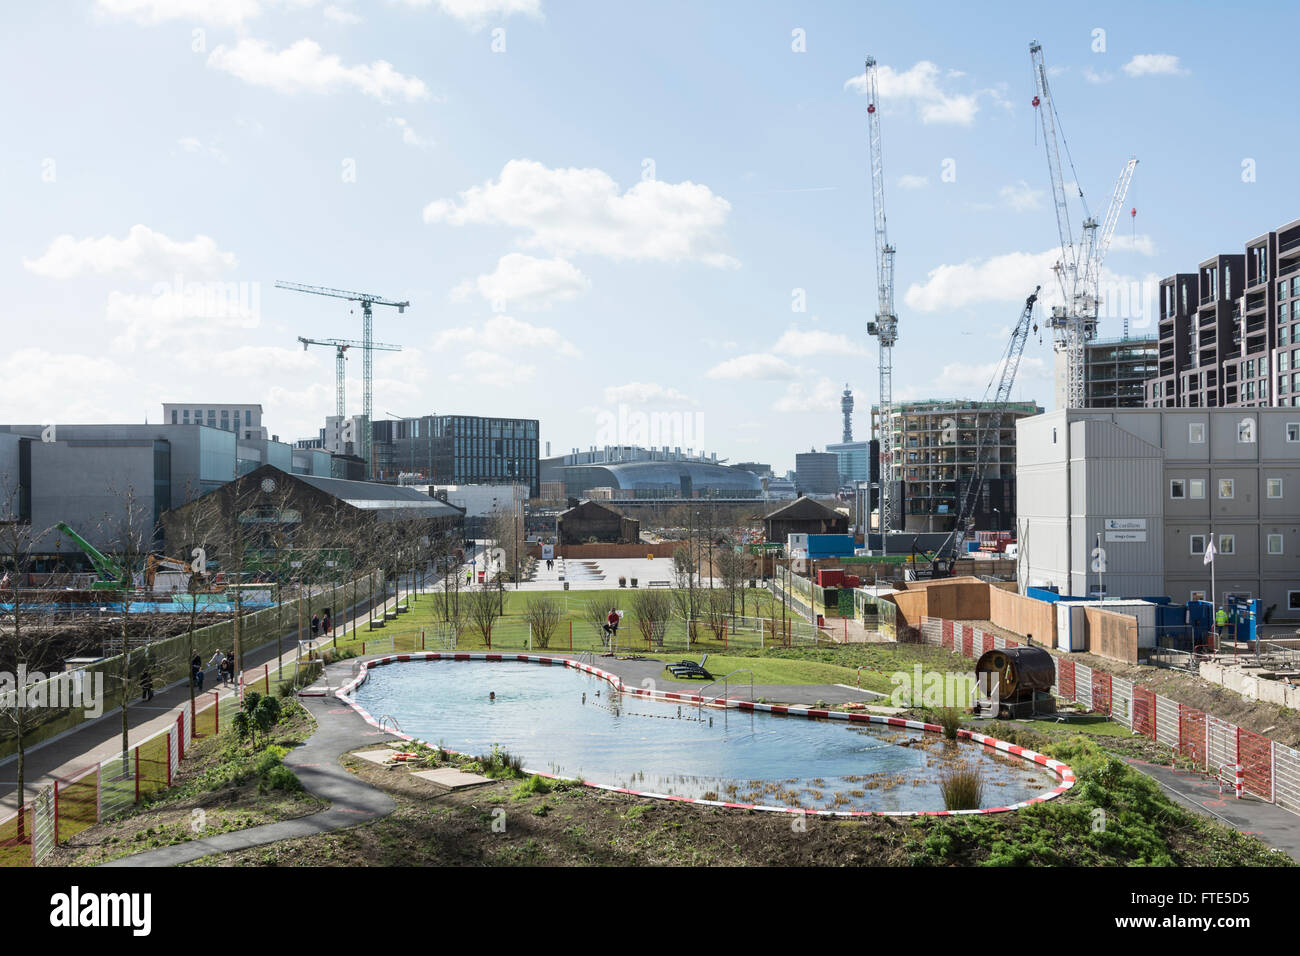 King's Cross Pond Club is the UK's first ever man-made freshwater public bathing pond. Stock Photo